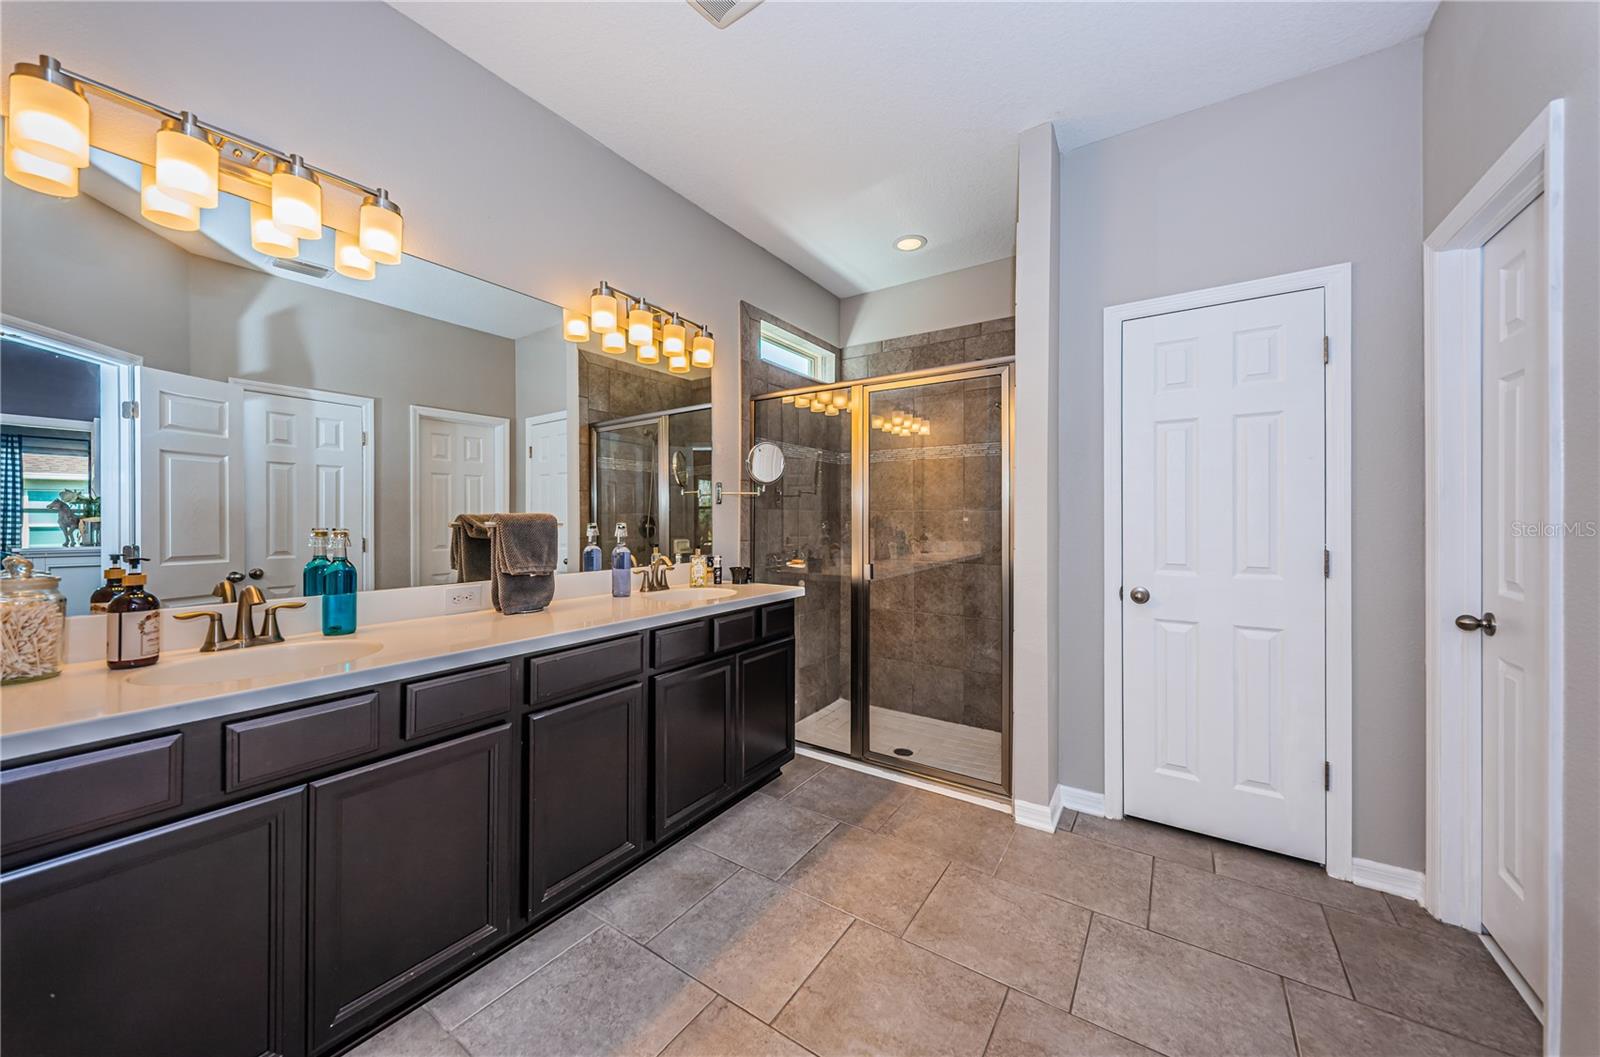 Master Bathroom, walk in his and hers closets